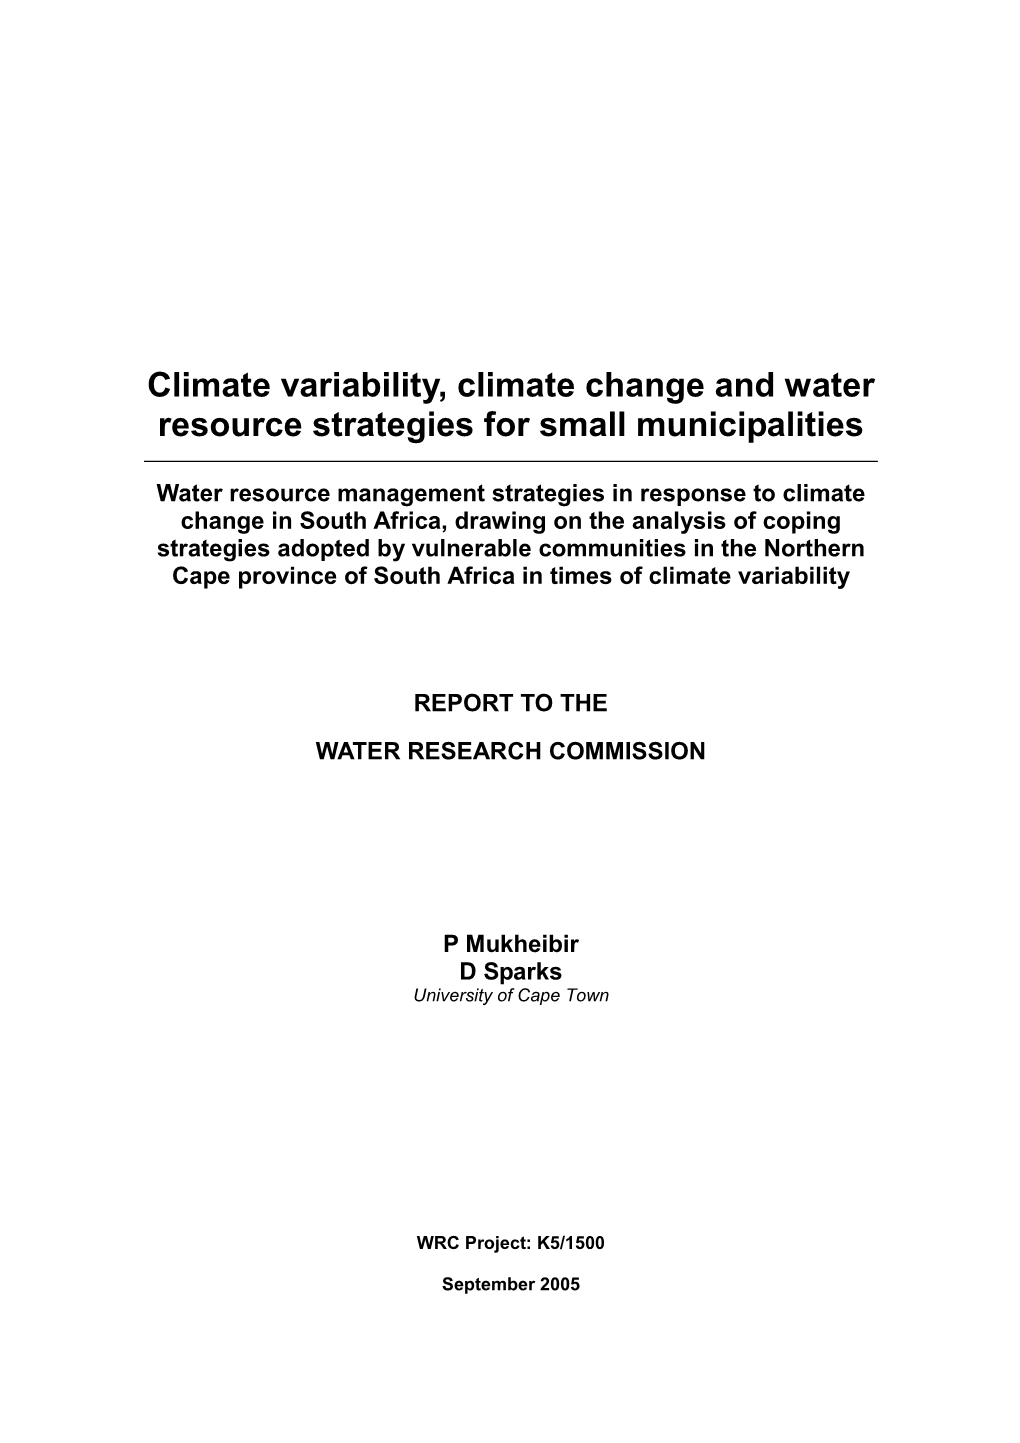 Climate Variability, Climate Change and Water Resource Strategies for Small Municipalities